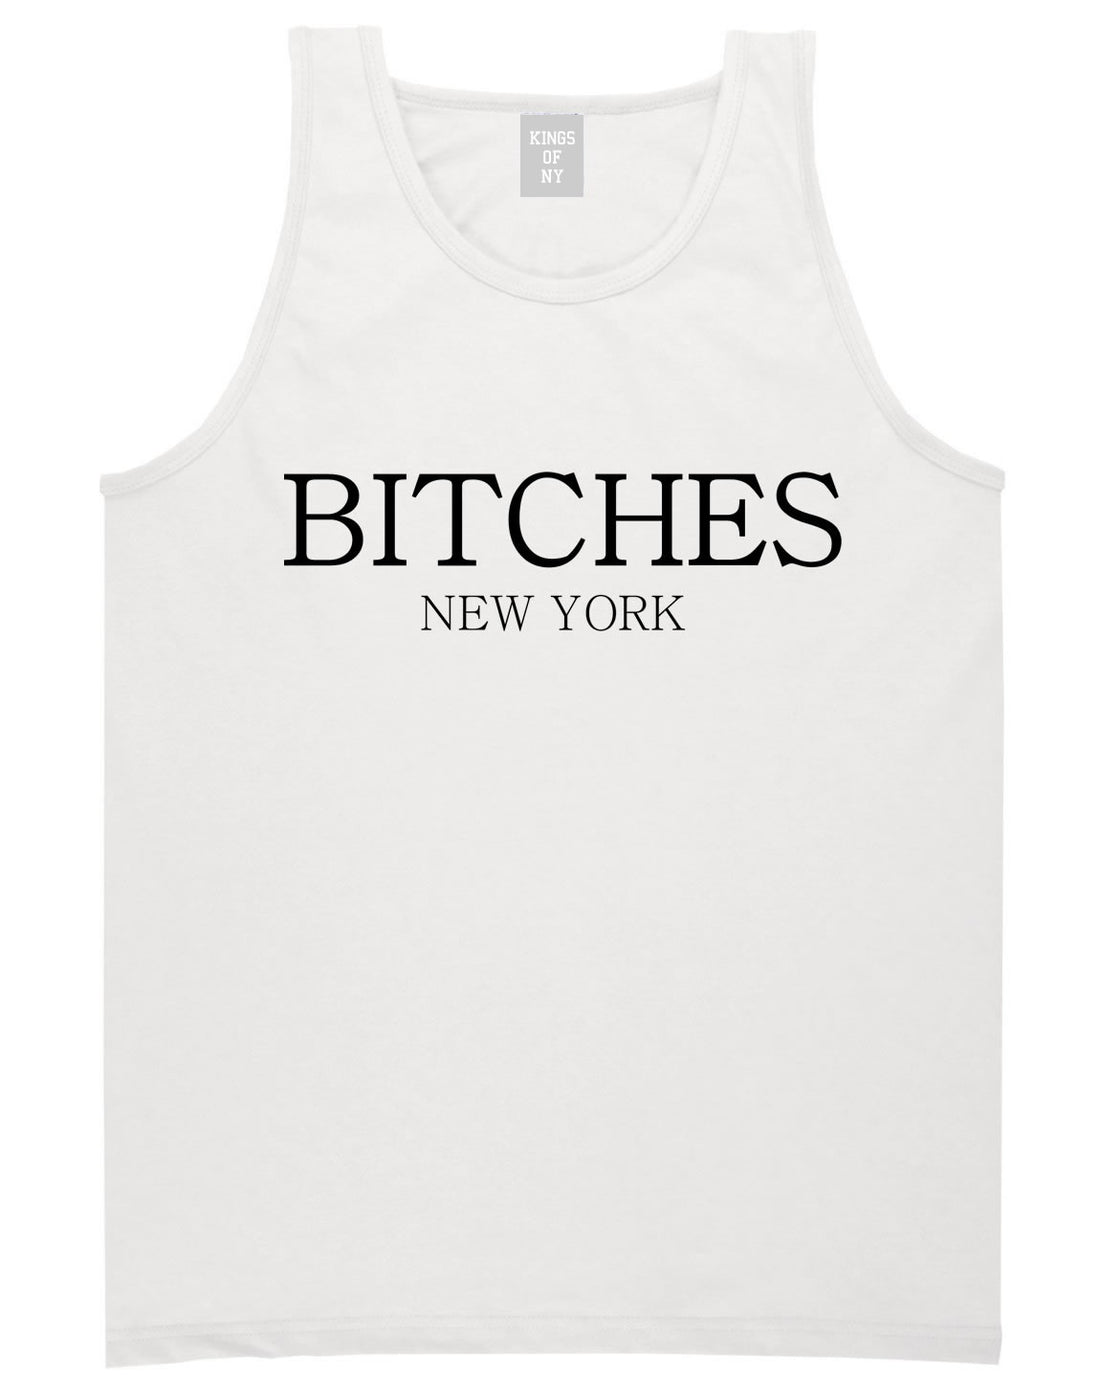  Bitches New York Tank Top in White by Kings Of NY